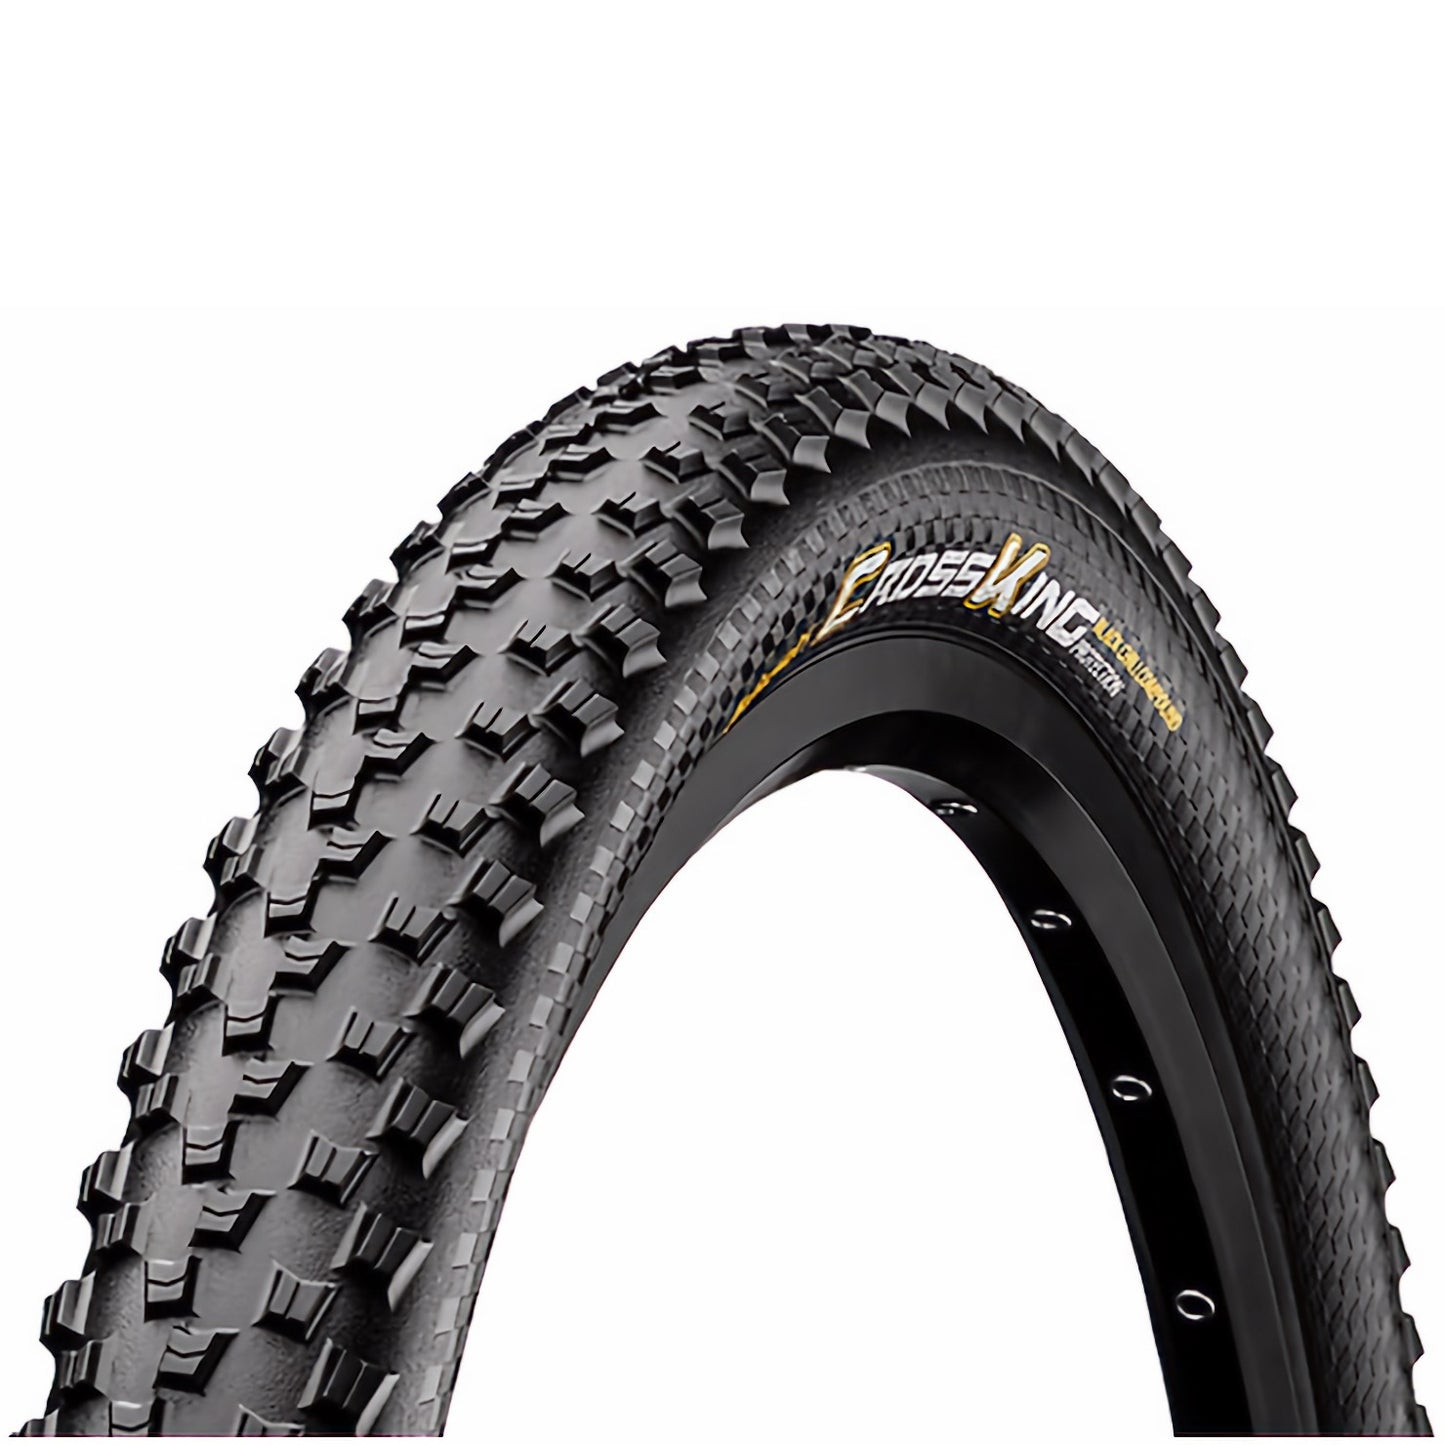 Continental Cross King Tyre - 29 Inch - 2.3 Inch - Yes - Black Chili - ProTection - Soft - Medium-Duty Protection - TR Kevlar Folding - Black